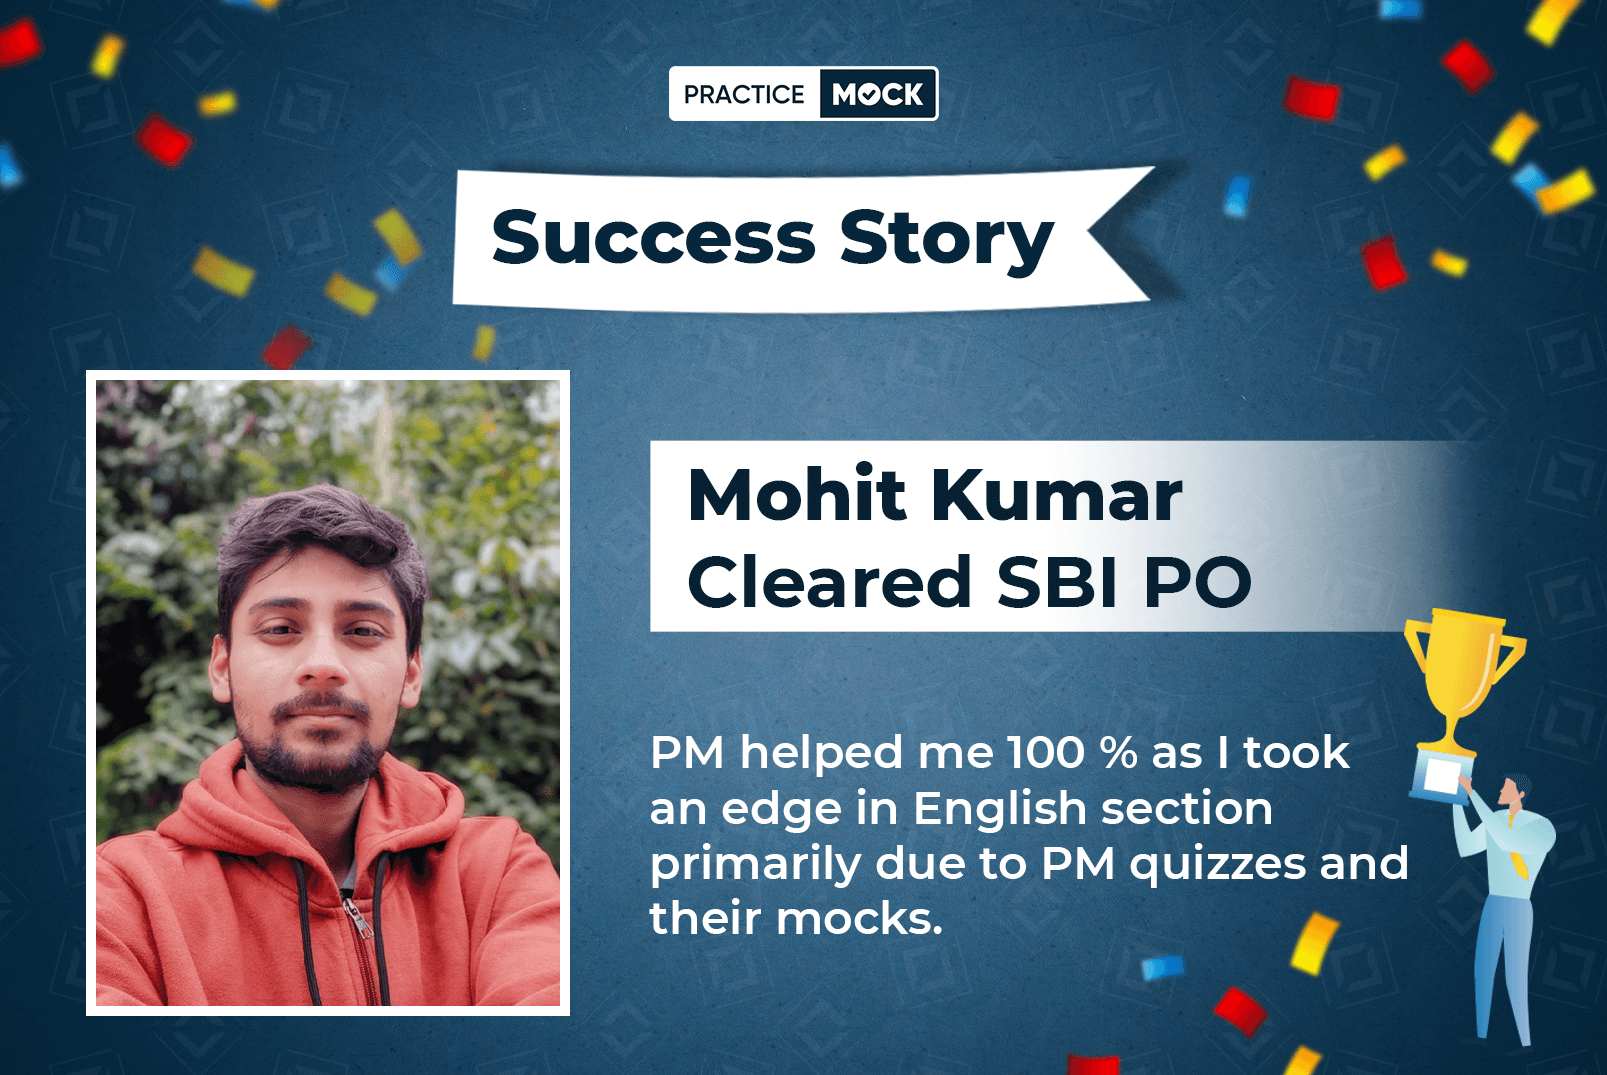 Success Story of Mohit Kumar Cleared SBI PO